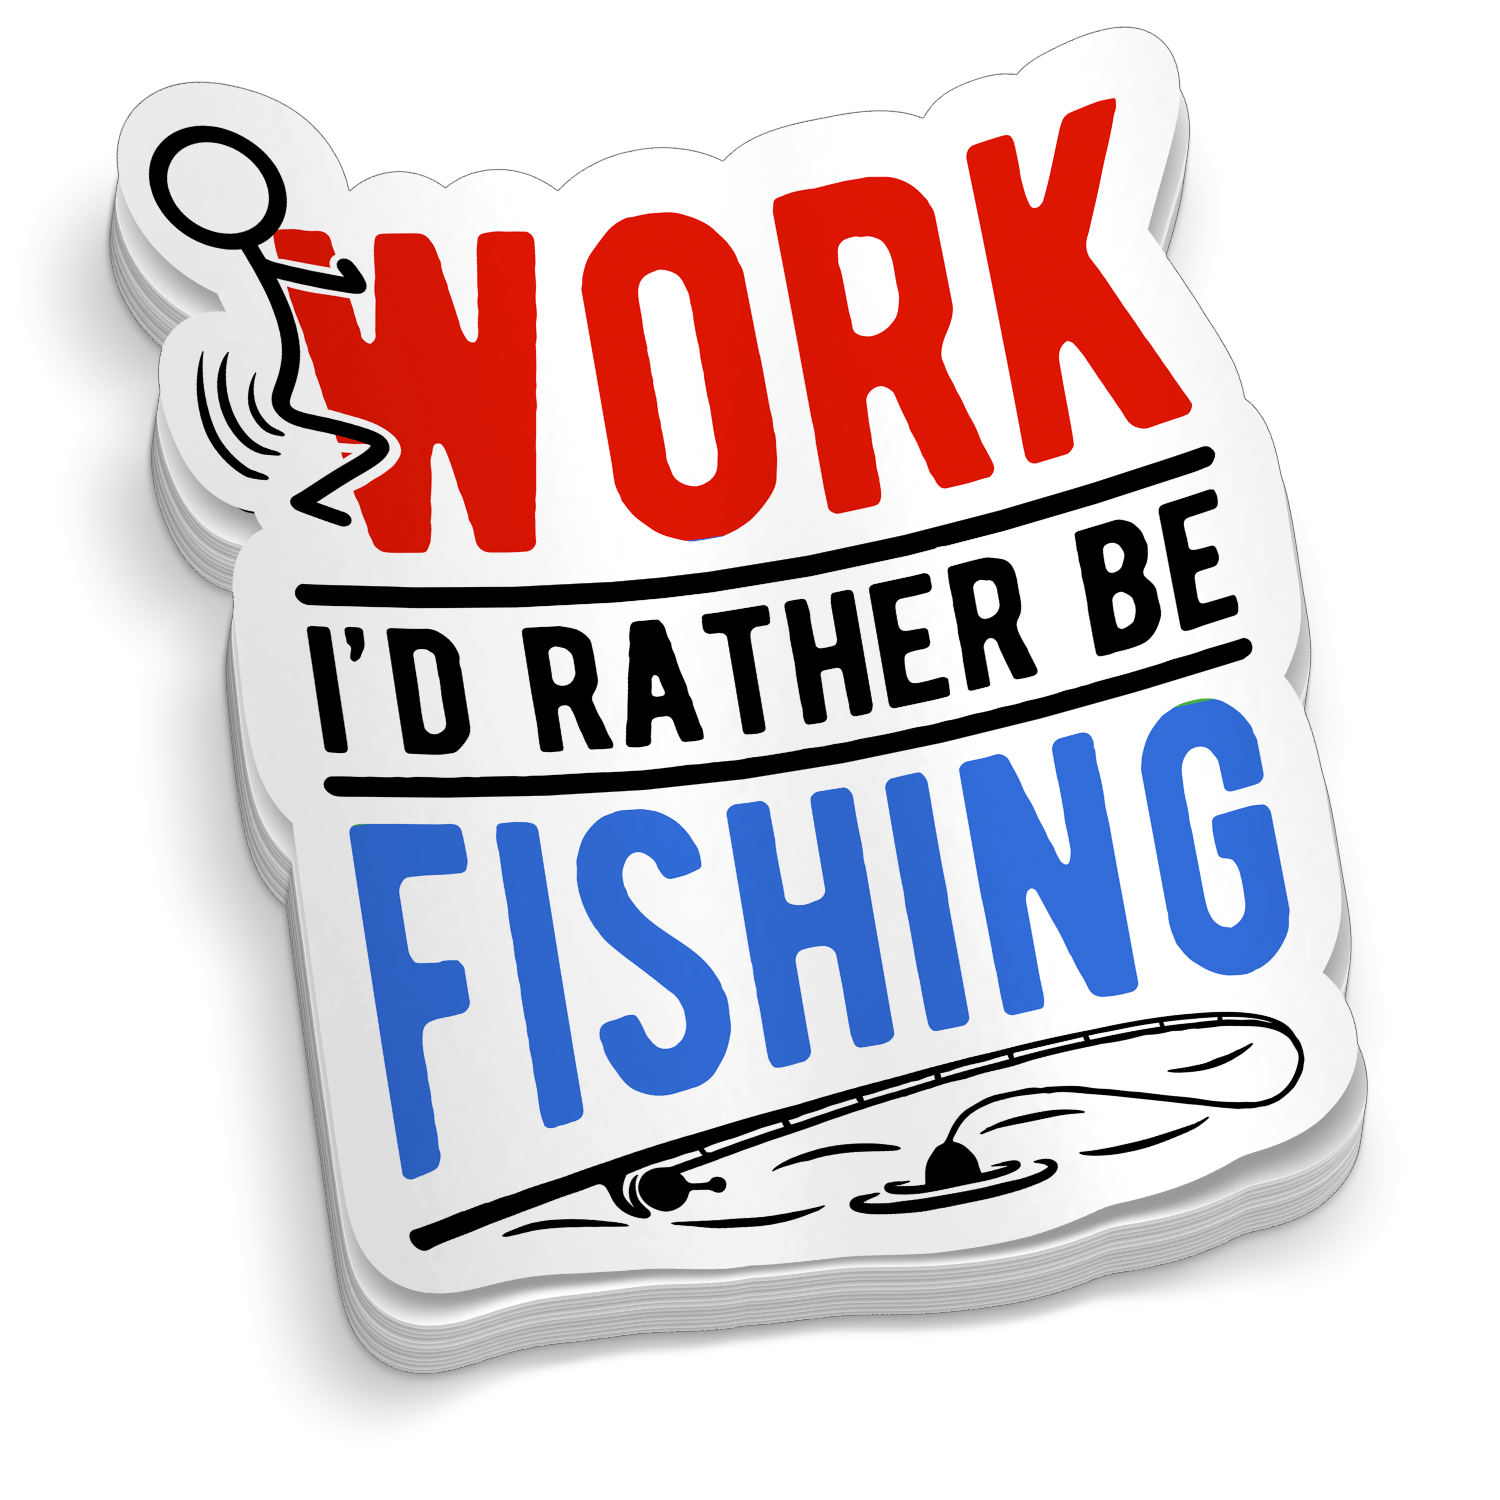 F Work Rather Be Fishing - Funny Fishing Sticker